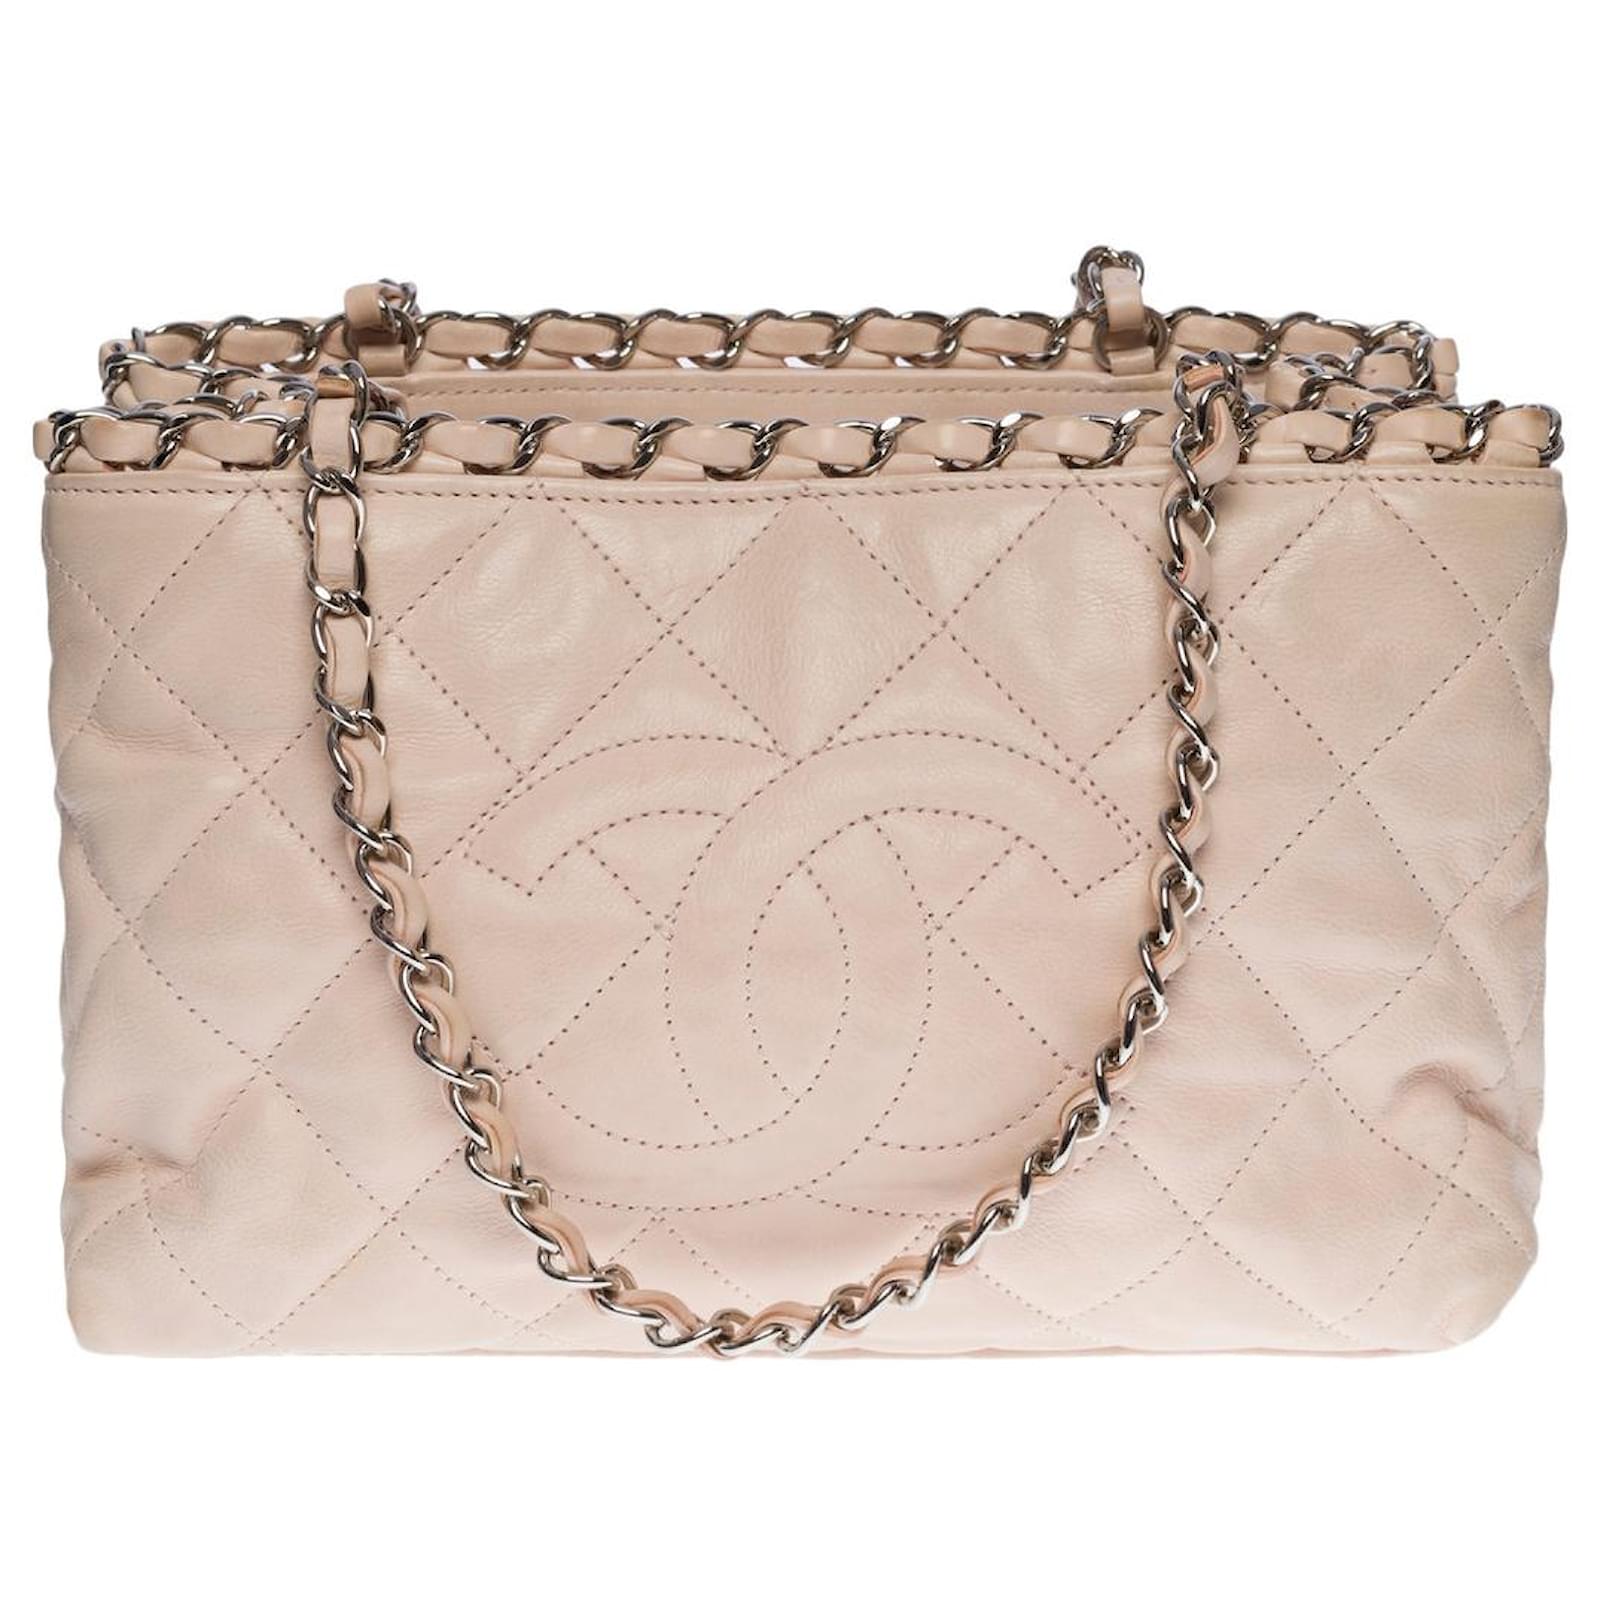 Handbags Chanel Chanel Mini Tote Bag in Powder Pink Quilted Lamb Leather -100421